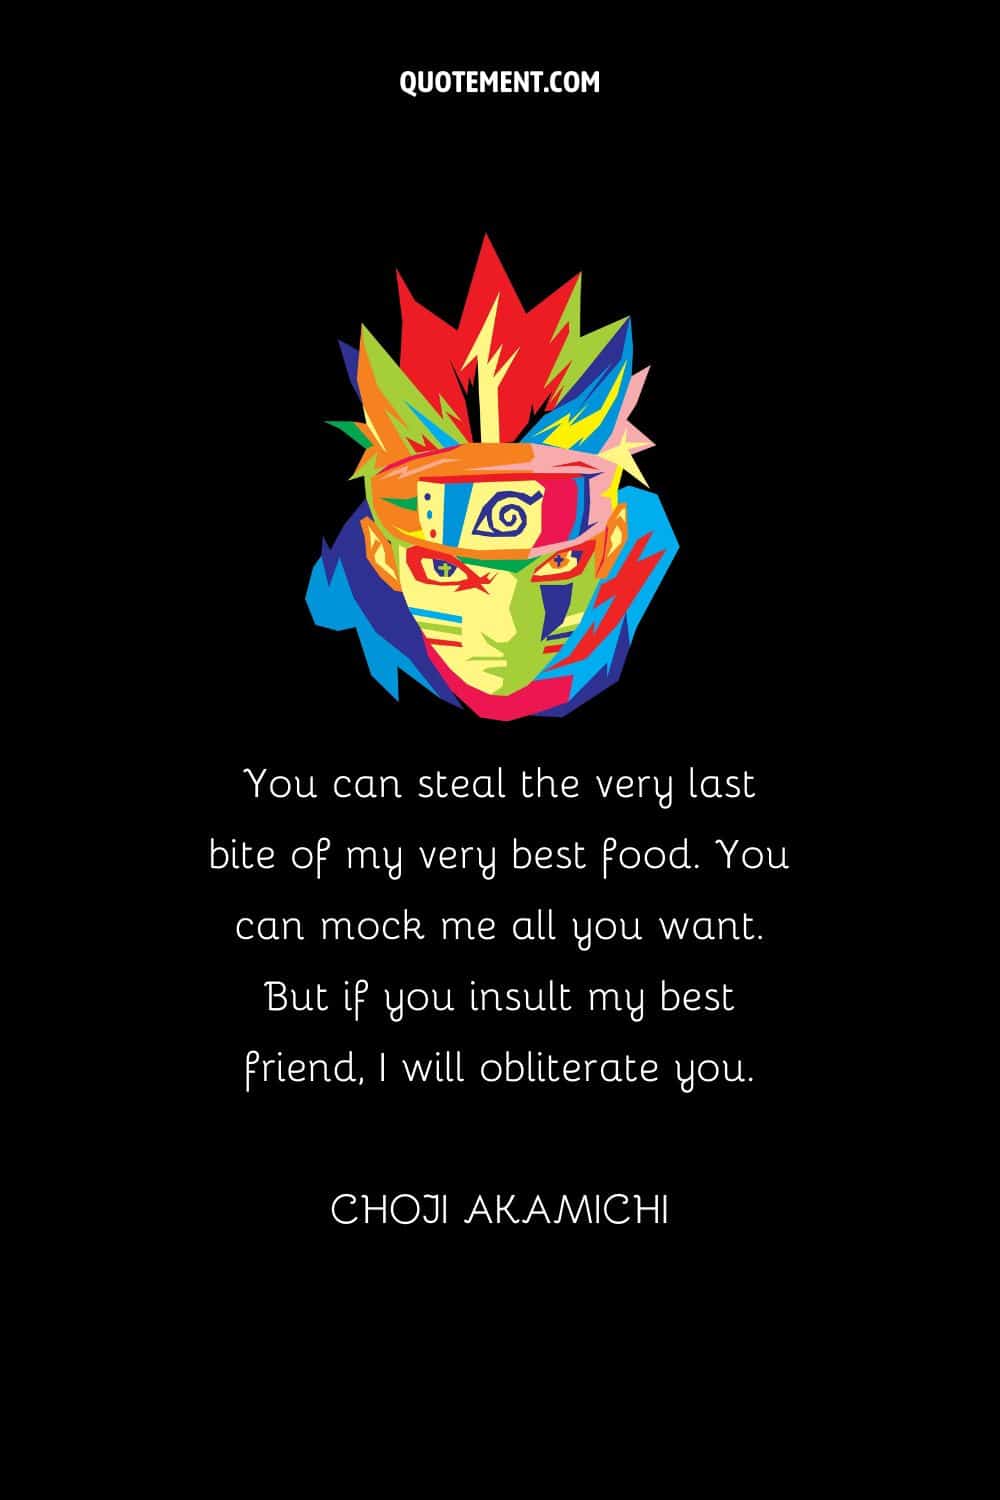 “You can steal the very last bite of my very best food. You can mock me all you want. But if you insult my best friend, I will obliterate you.” — Choji Akamichi